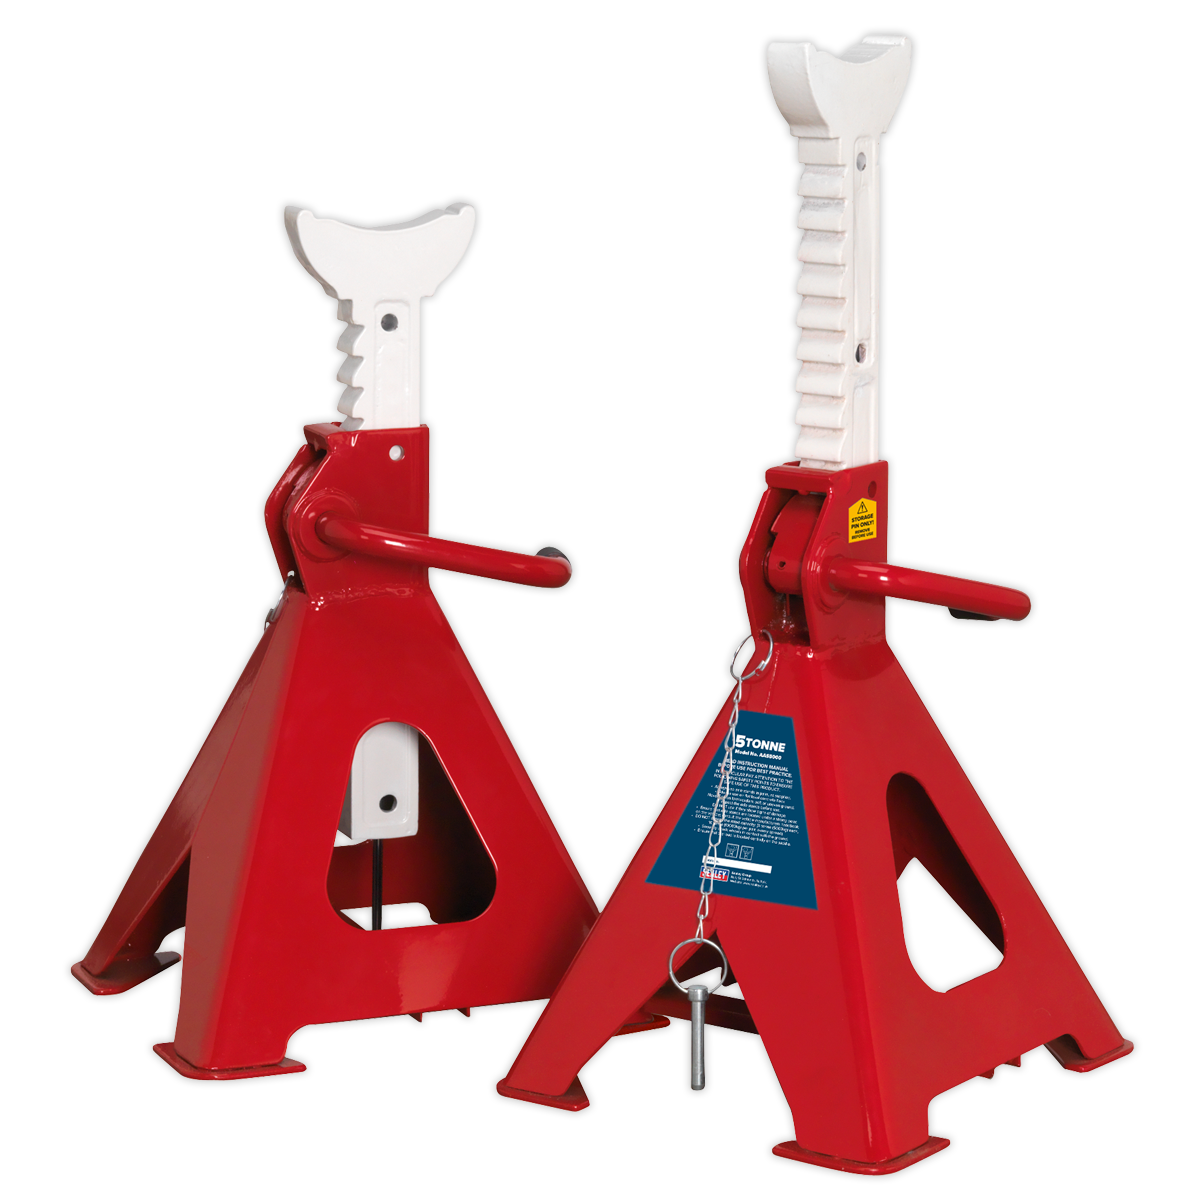 Sealey Auto Rise Ratchet Axle Stands (Pair) 5tonne Capacity per Stand AAS5000